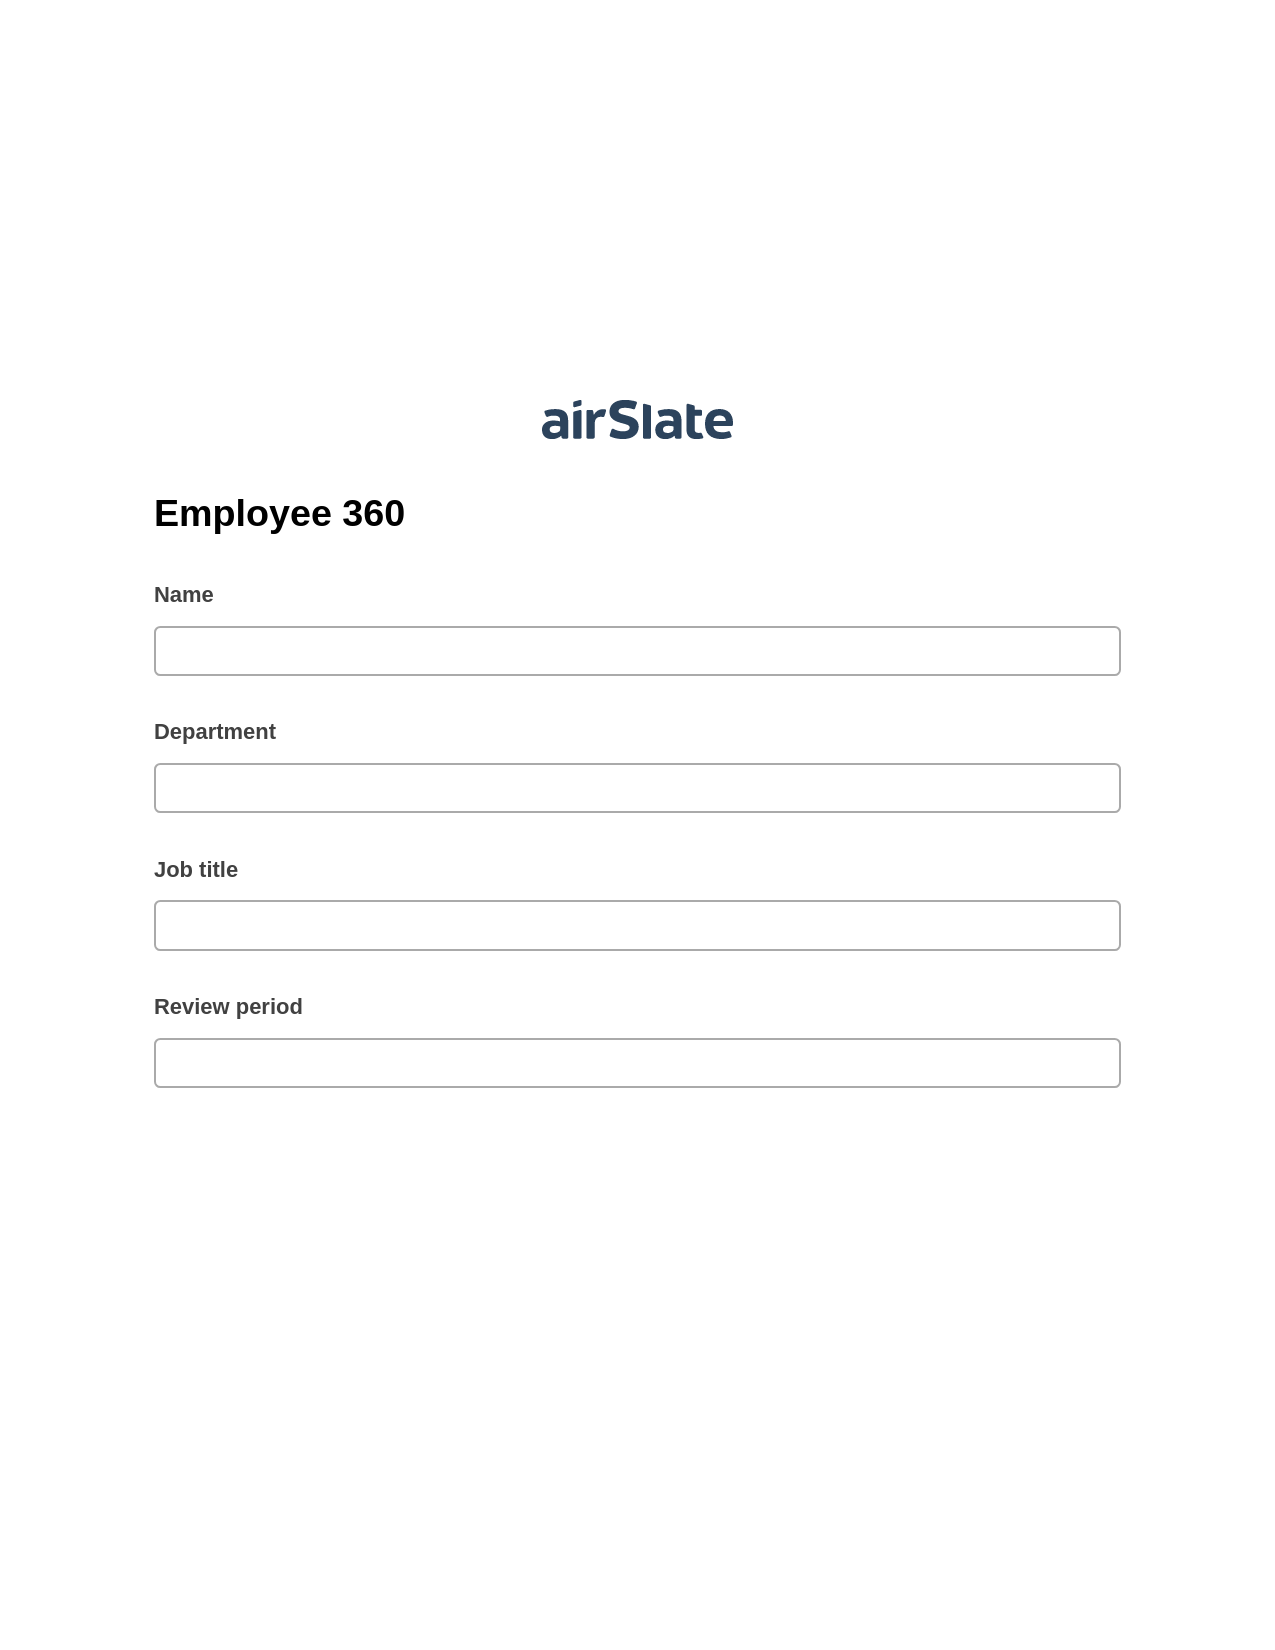 Multirole Employee 360 Pre-fill from Salesforce Records with SOQL Bot, Jira Bot, Archive to Box Bot